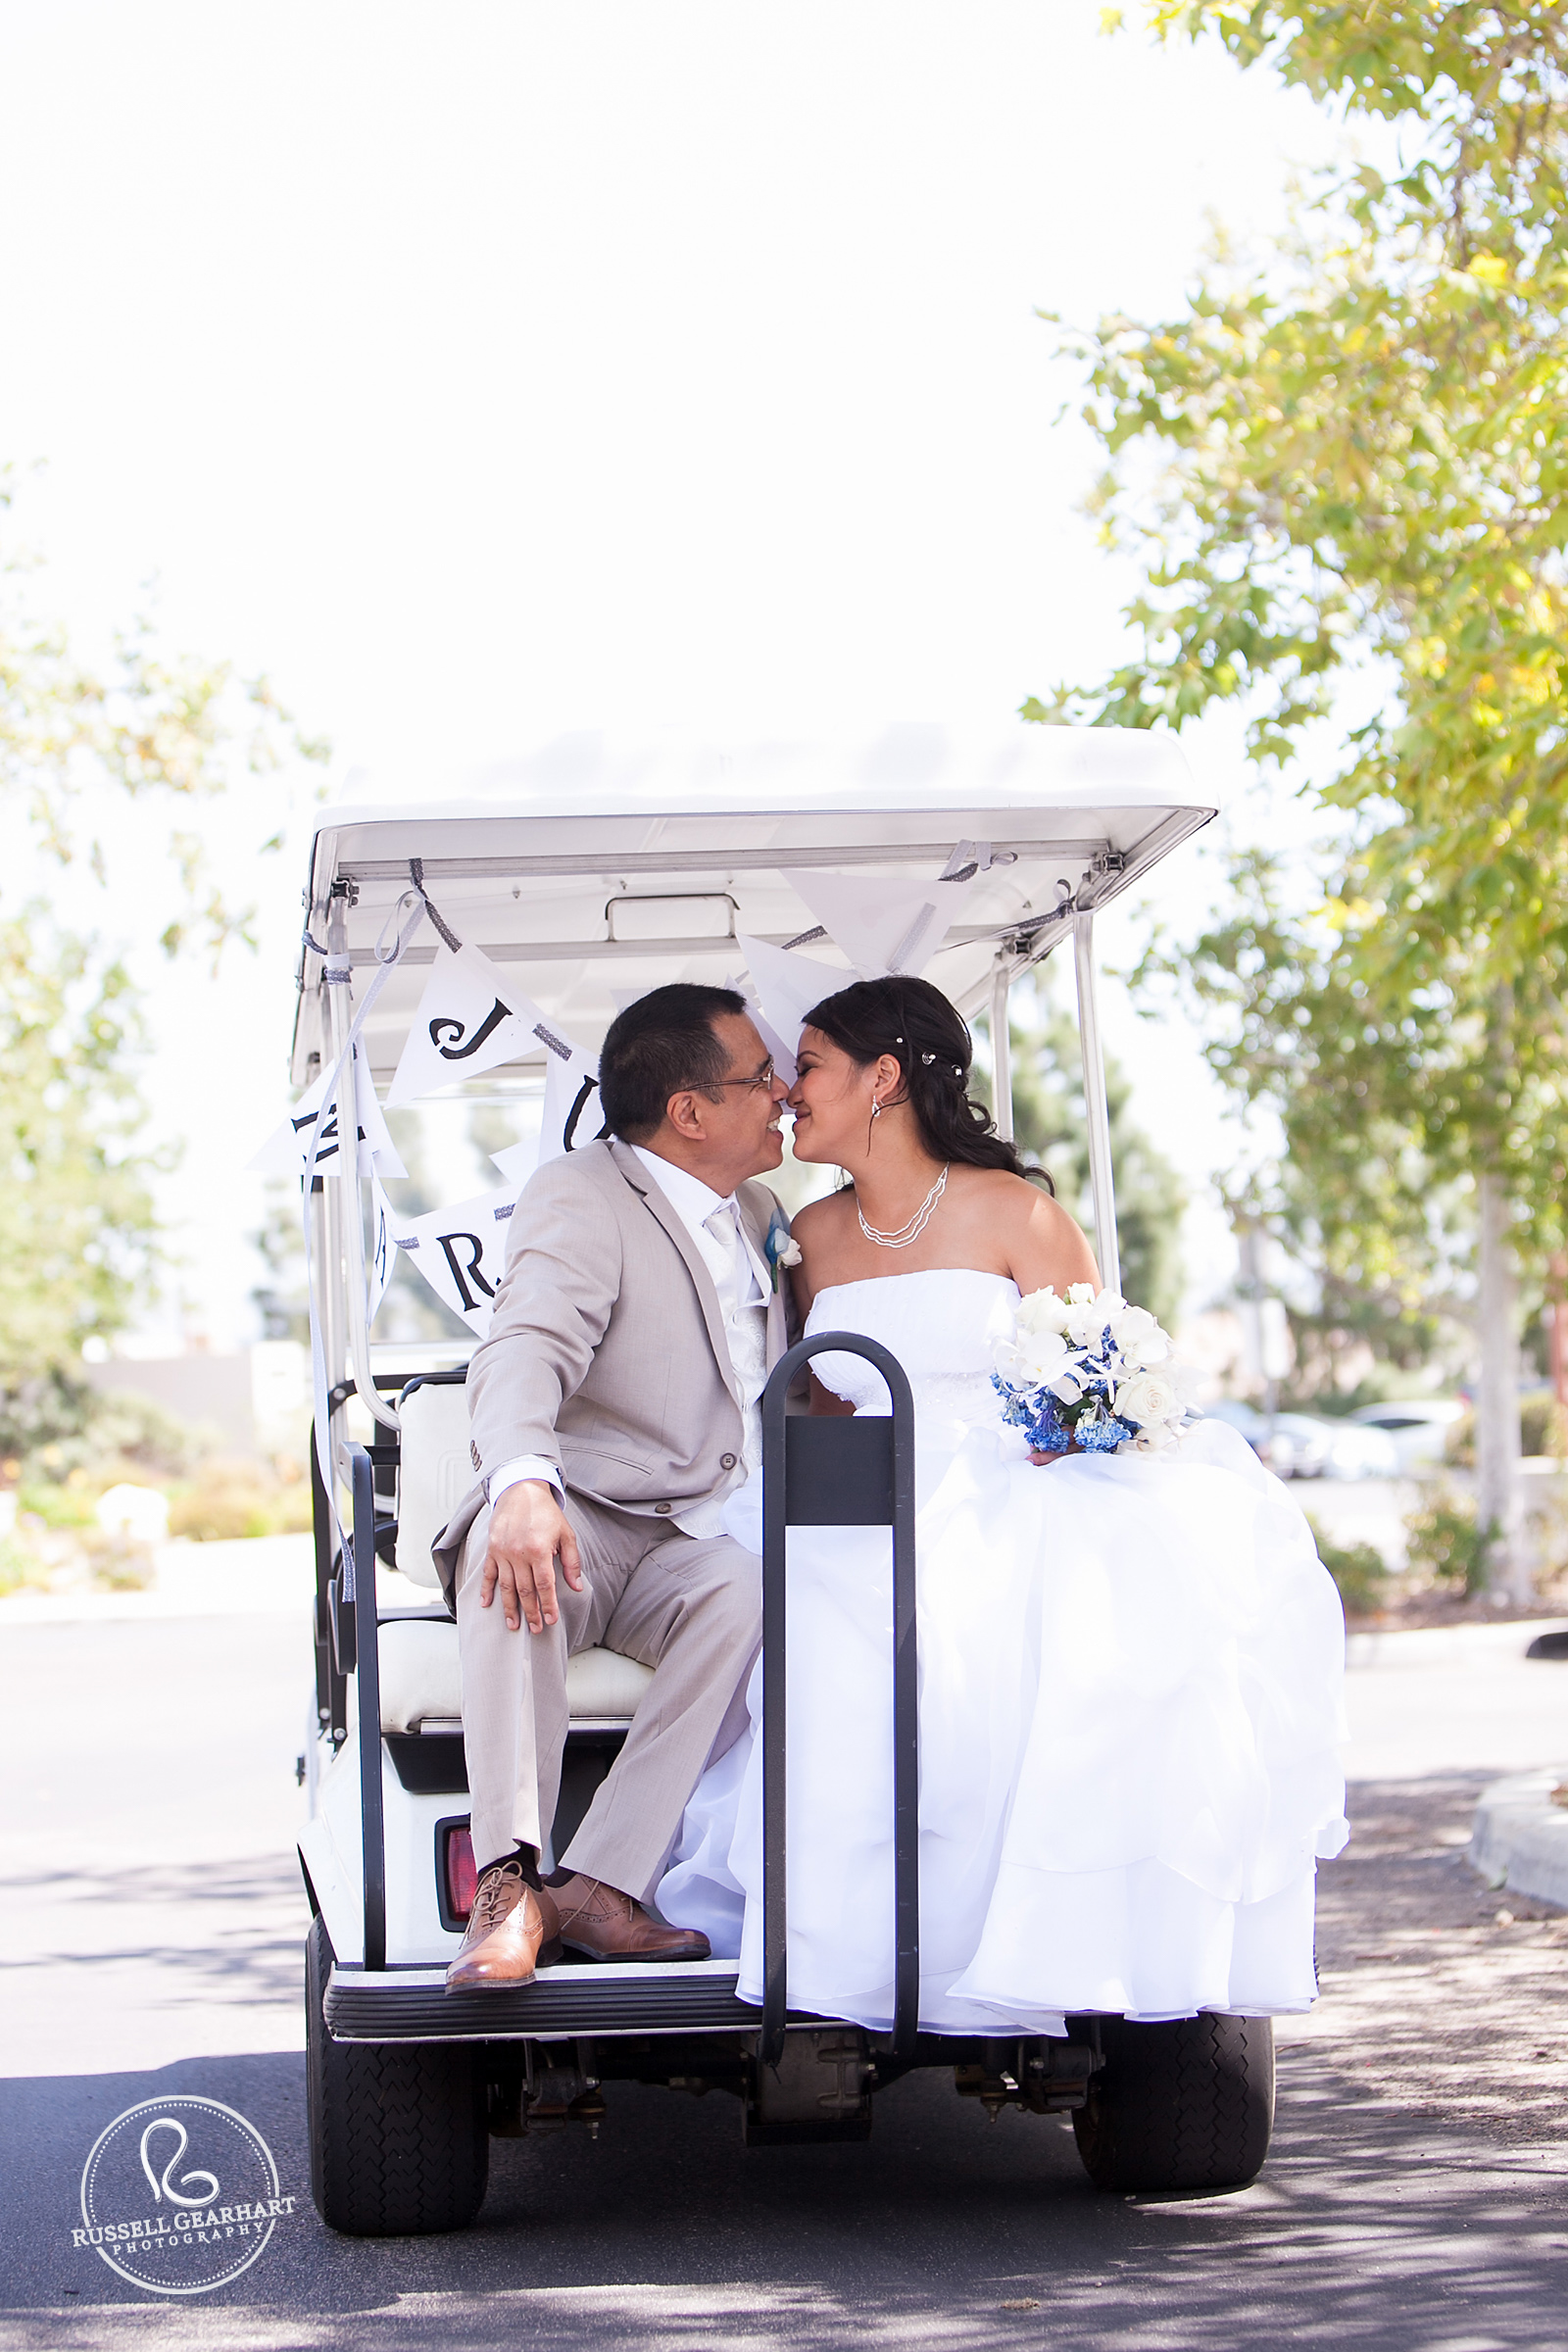 Just Married Couple on Golf Cart - Wedding at Black Gold Golf Club – Russell Gearhart Photography – www.gearhartphoto.com